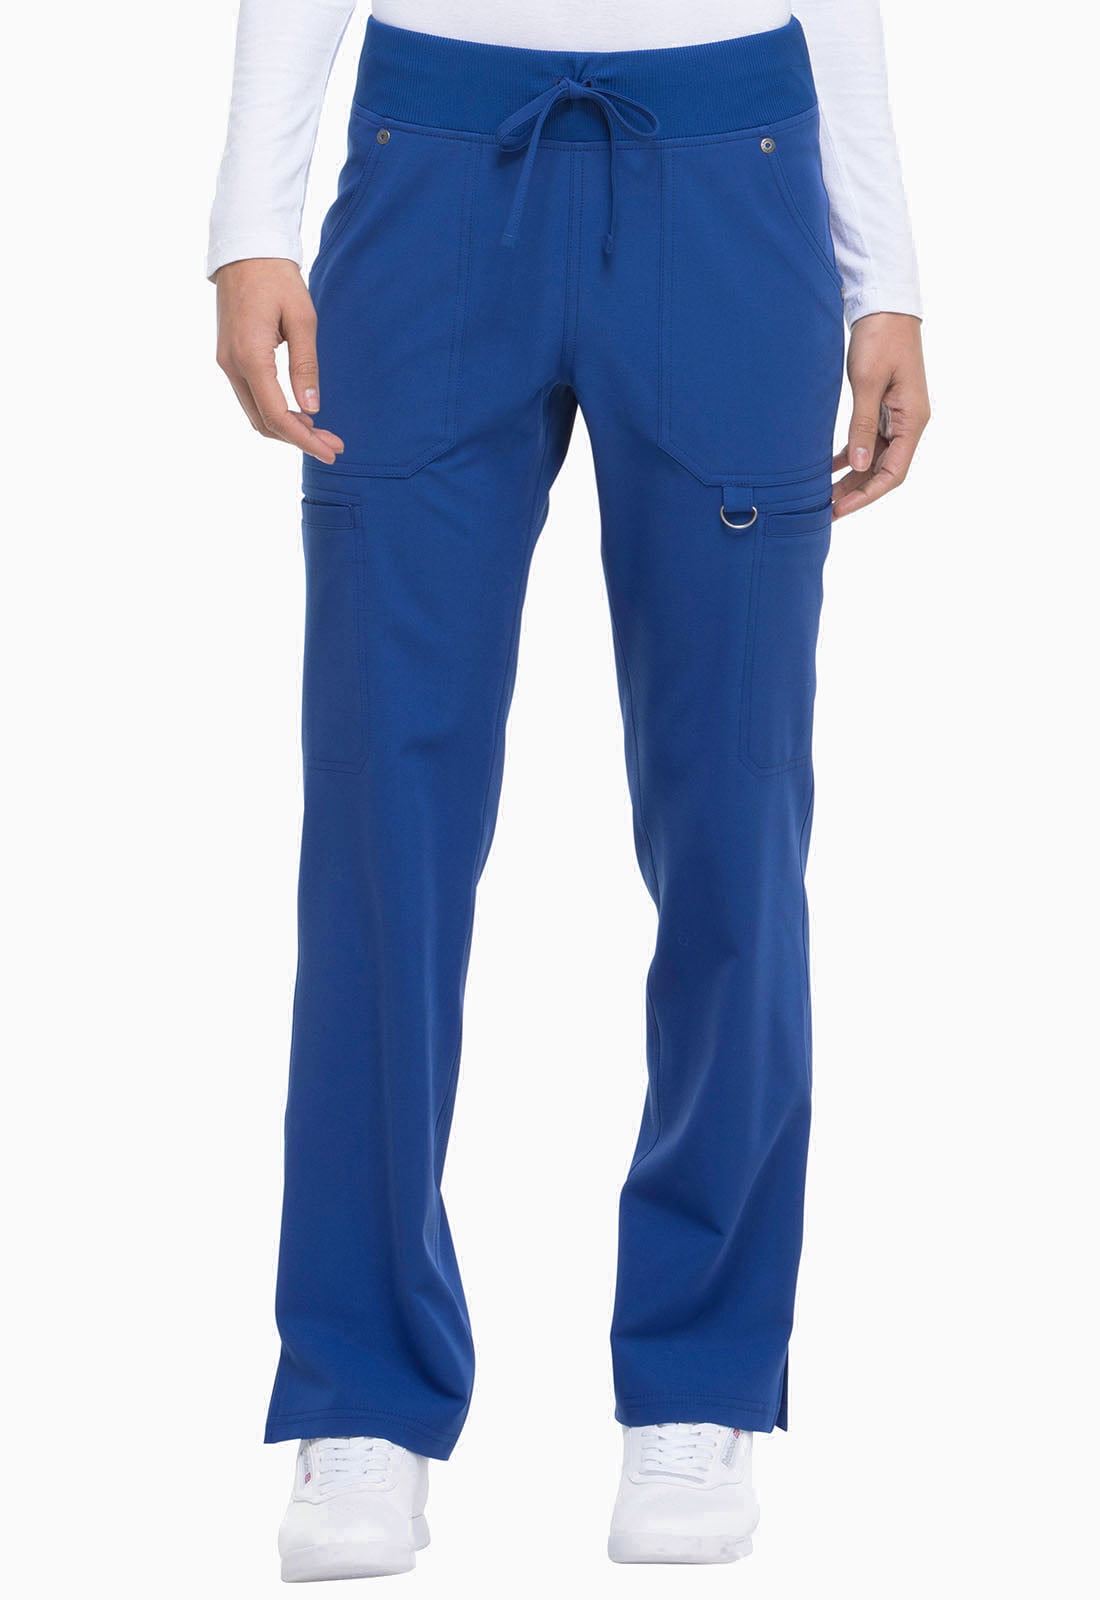 Dickies - Dickies Xtreme Stretch Scrubs Pant for Women Mid Rise Rib